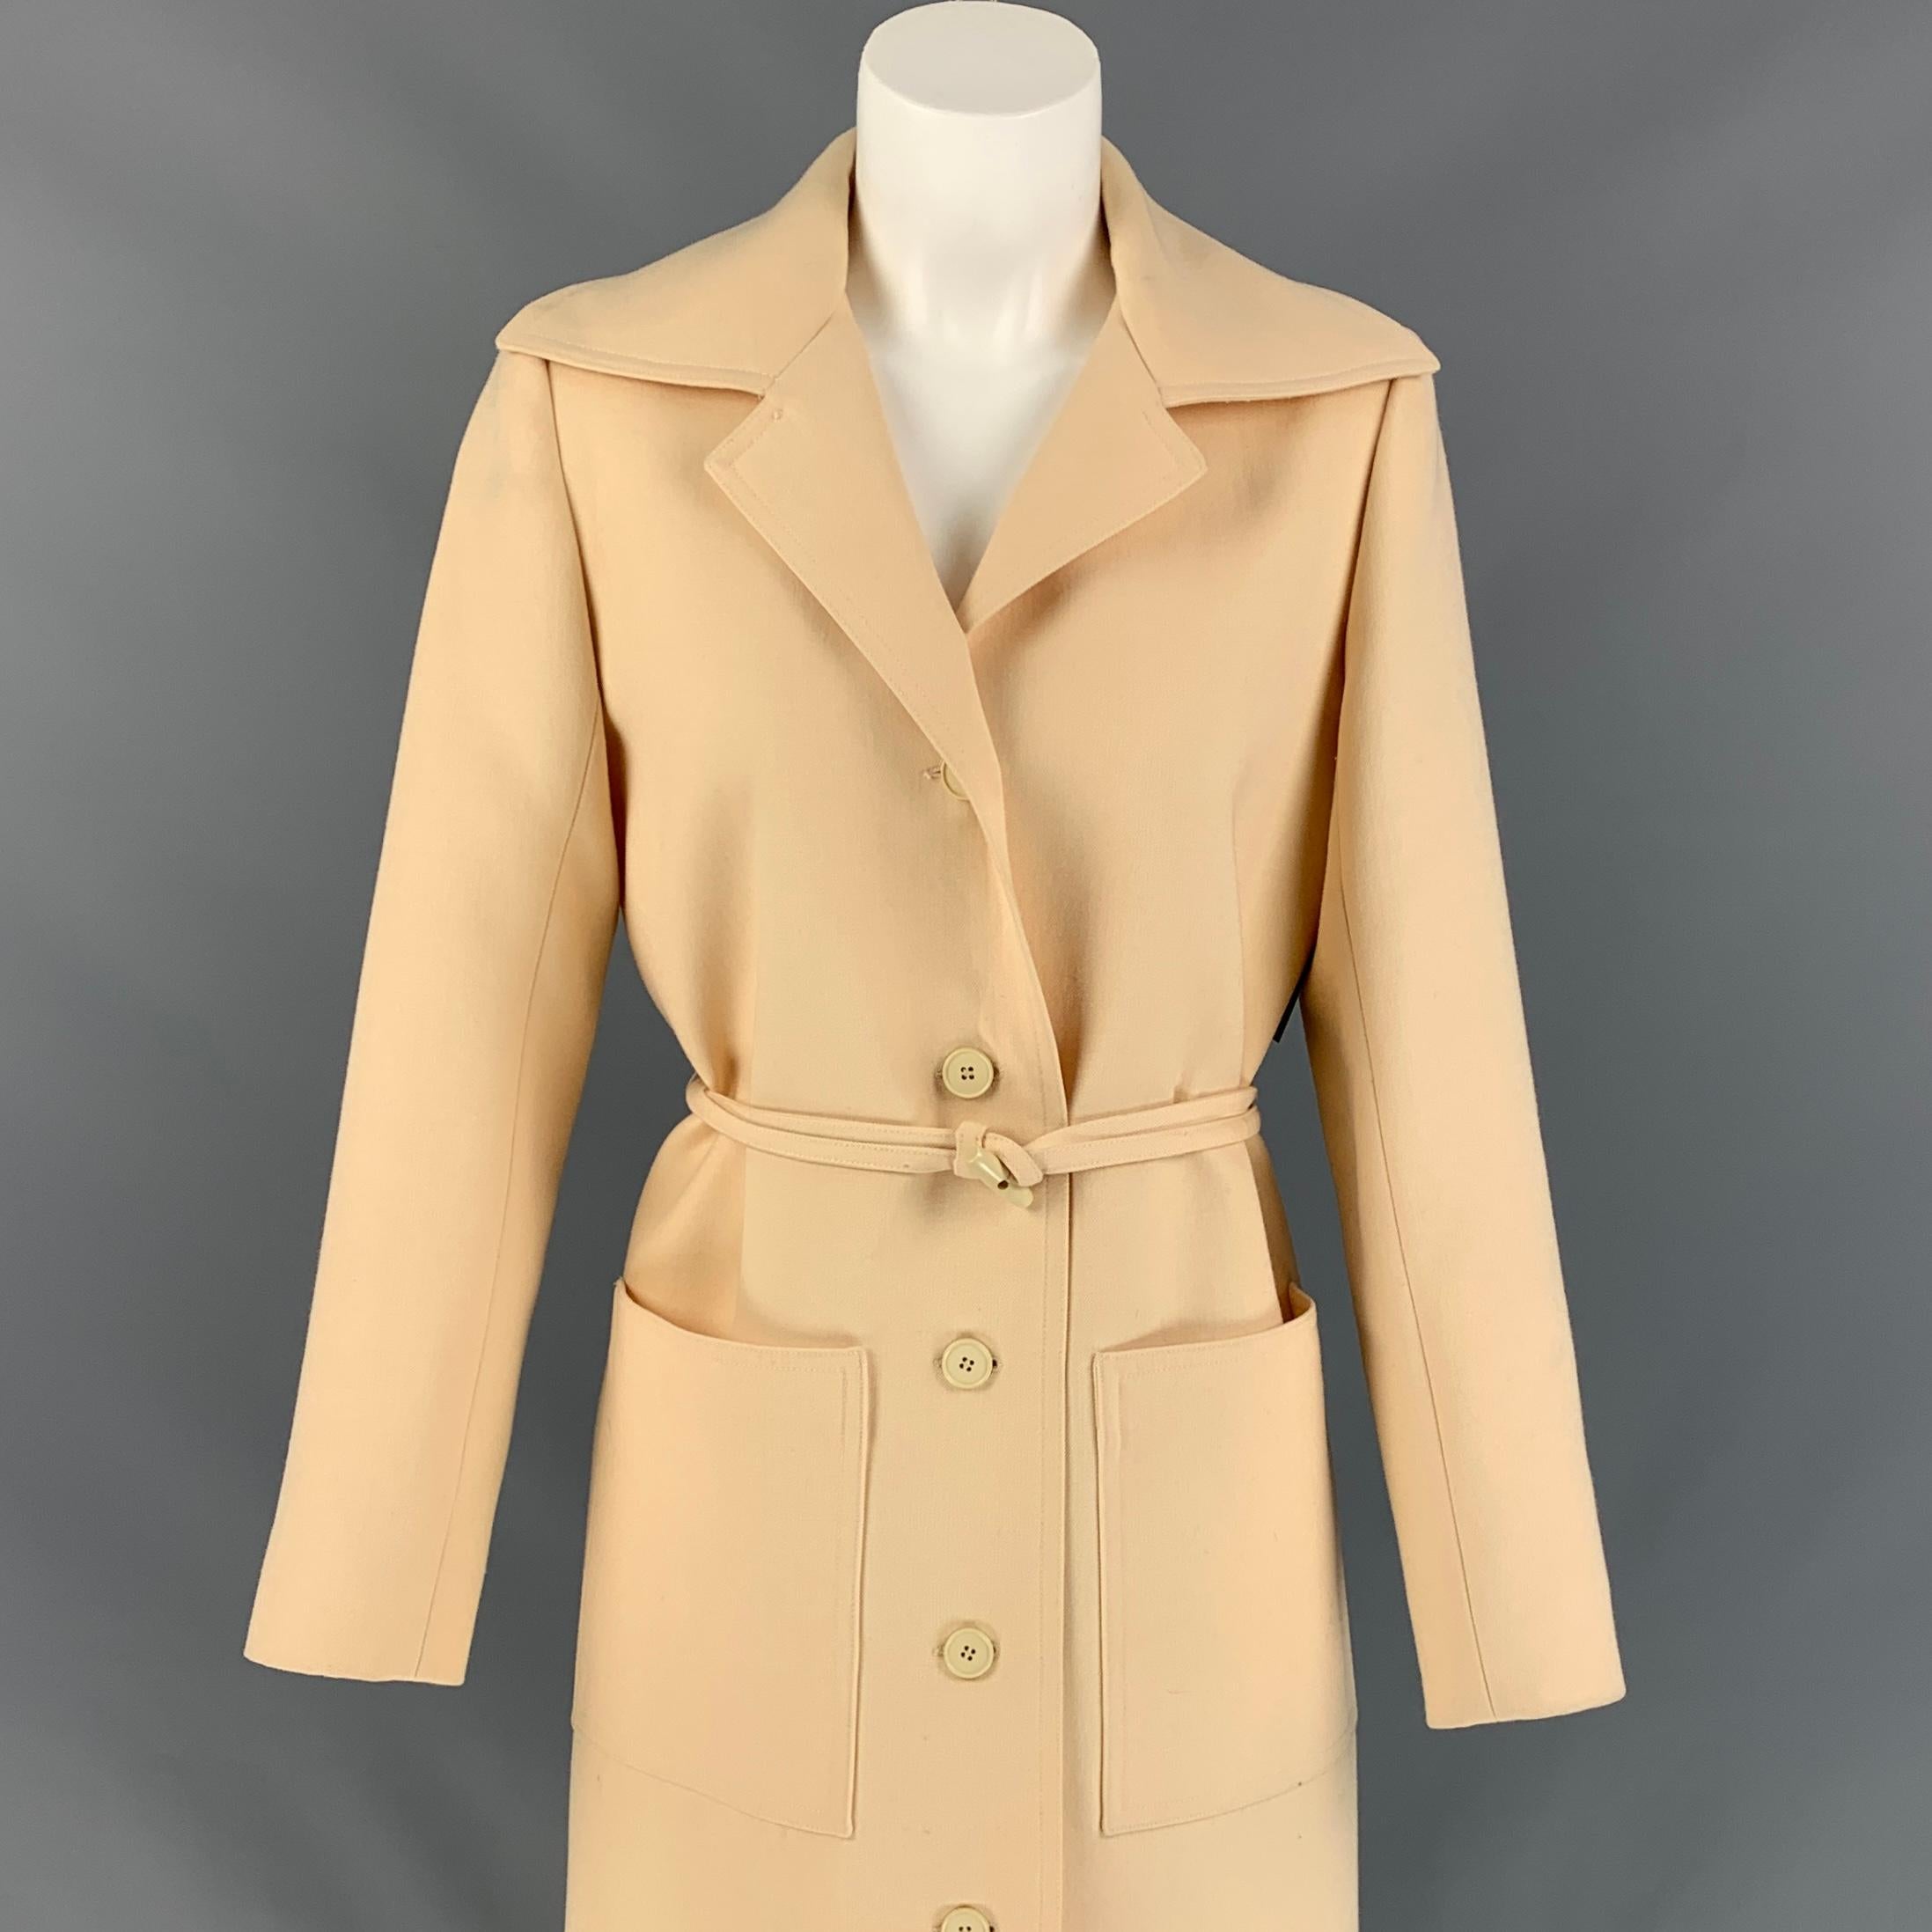 Nouvelle Boutique by HUBERT de GIVENCHY coat comes in a cream twill material with a full liner featuring a toggle belted detail, patch pockets, single back vent, large lapel, and a buttoned closure. Made in France. 

Good Pre-Owned Condition. Fabric